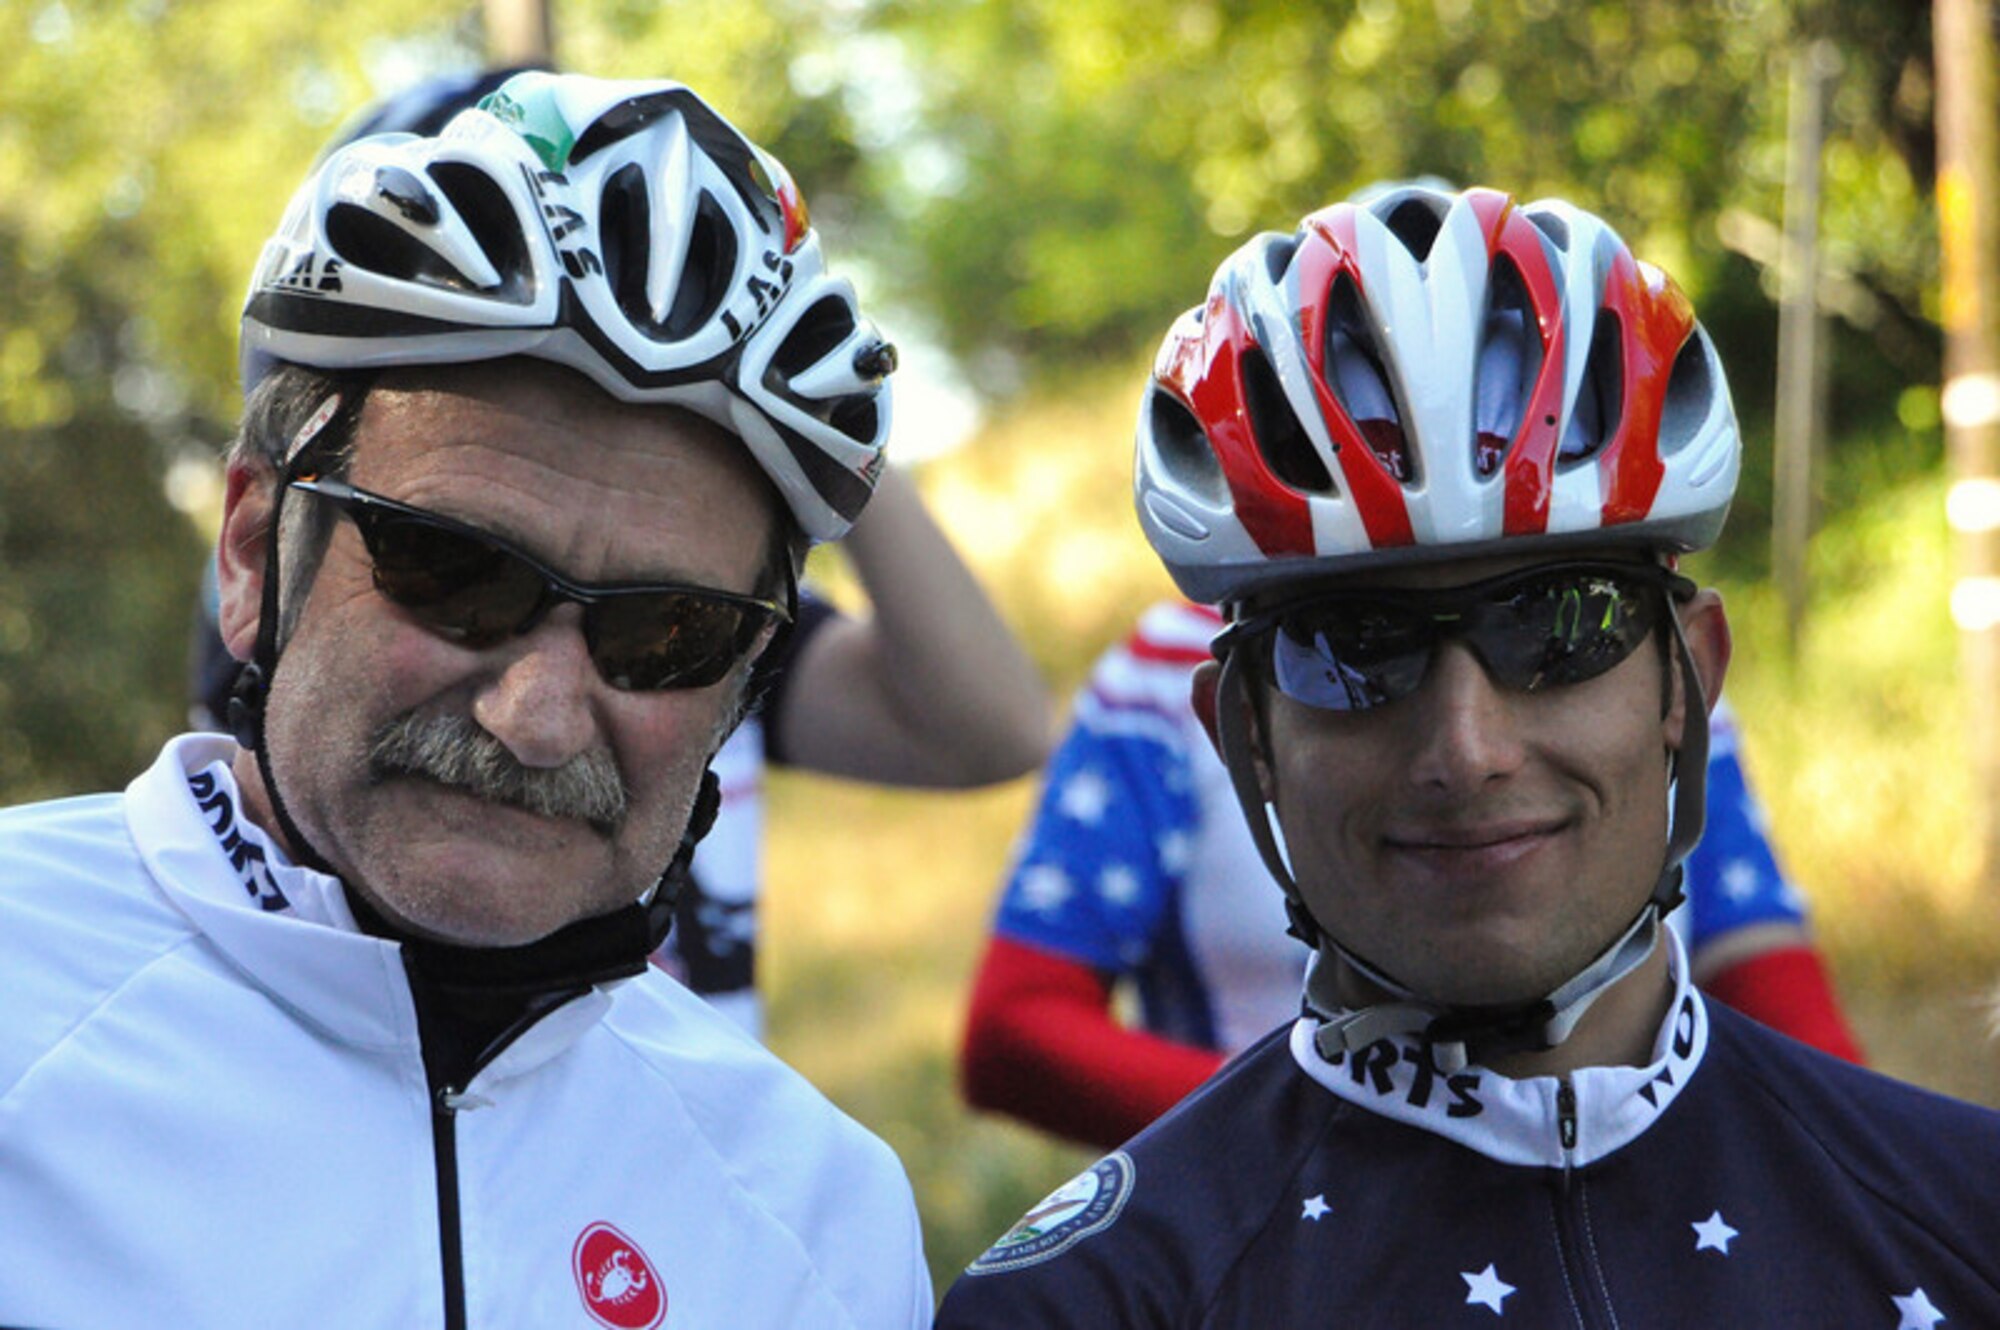 Staff Sgt. Marc Esposito from the 21st Special Tactics Squadron, Pope Air Force Base, N.C, and actor/comedian Robin Williams in San Francisco, Calif., May 22.  Sergeant Esposito is participating in Sea to Shining Sea, a 4,000-mile bike ride which started at the Golden Gate Bridge and will end at Virginia Beach, Va., July 24. The goal of the ride is to honor the courage of our service men and women, recognize the strength of the American spirit and challenge perceptions of how we view athletes. (Photo by Van Brinson)
